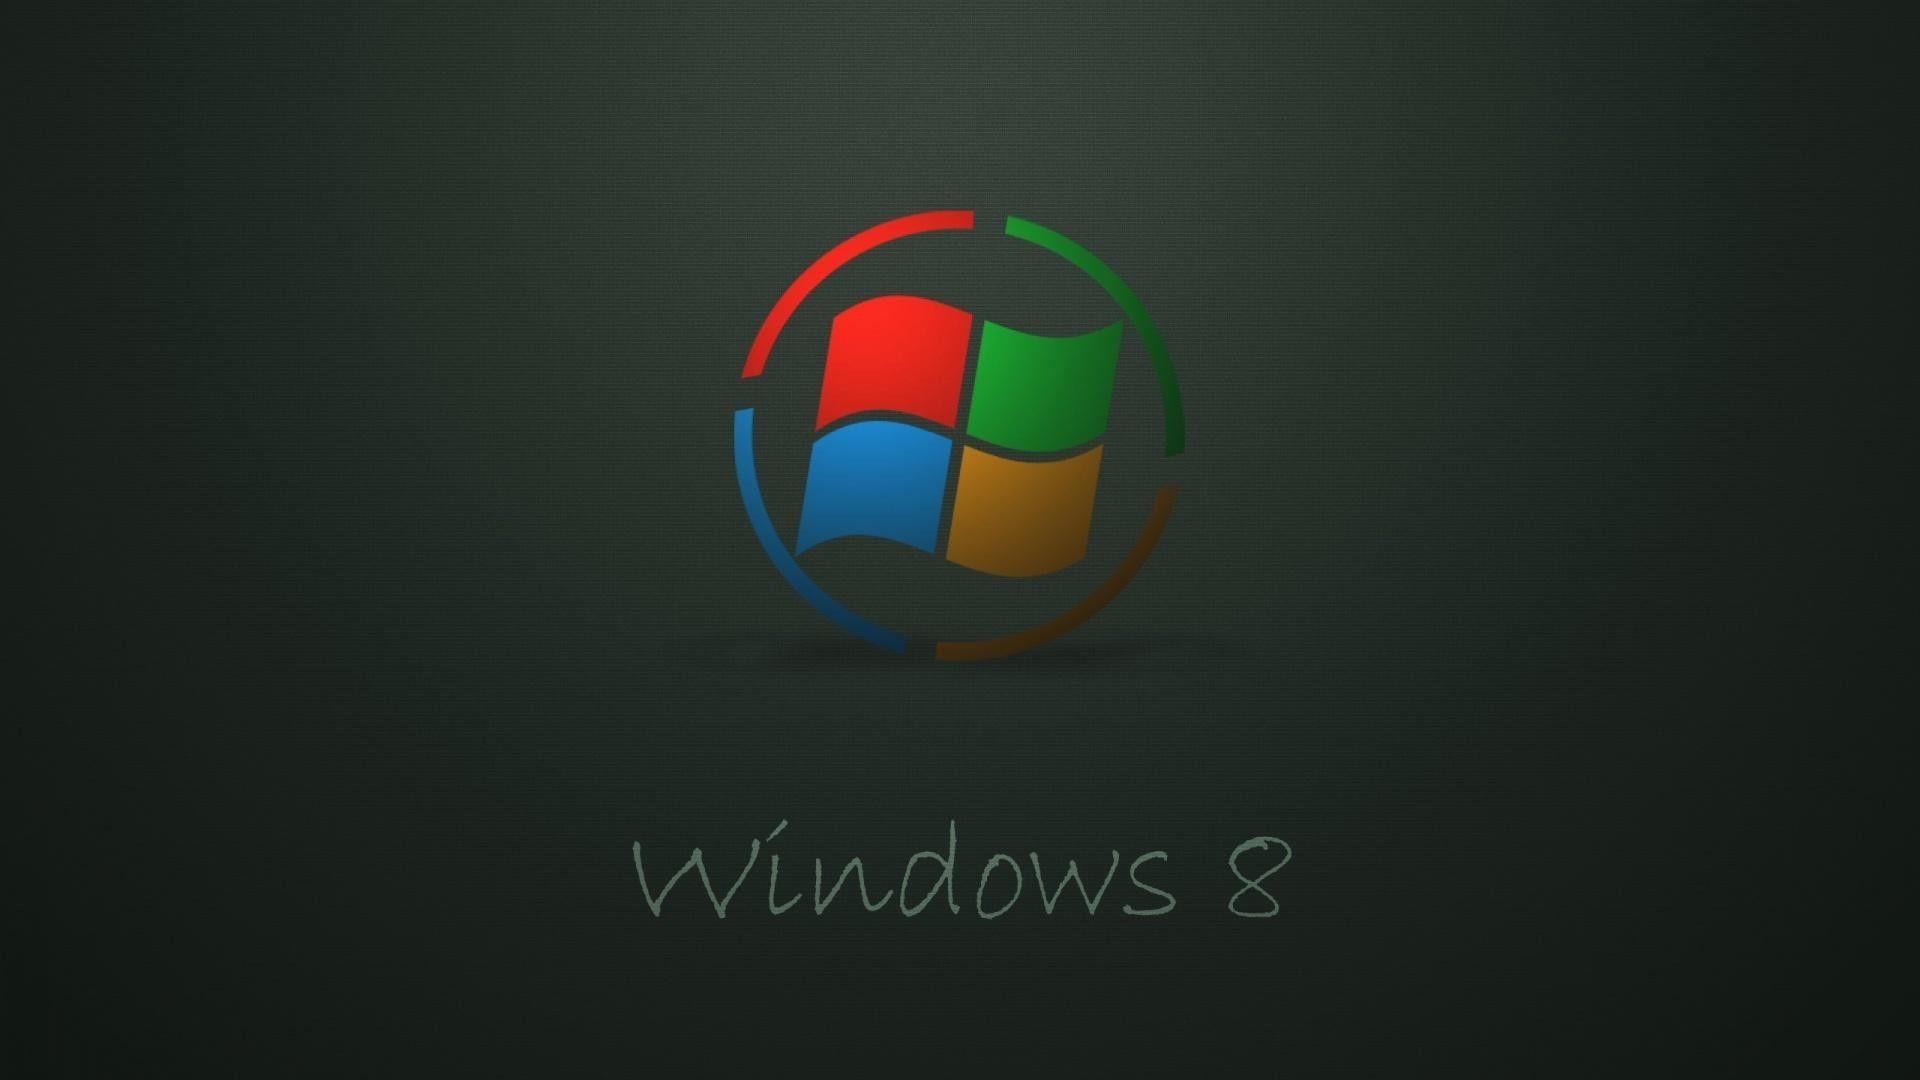 Windows 8 Wallpapers For Android - Wallpaper Cave